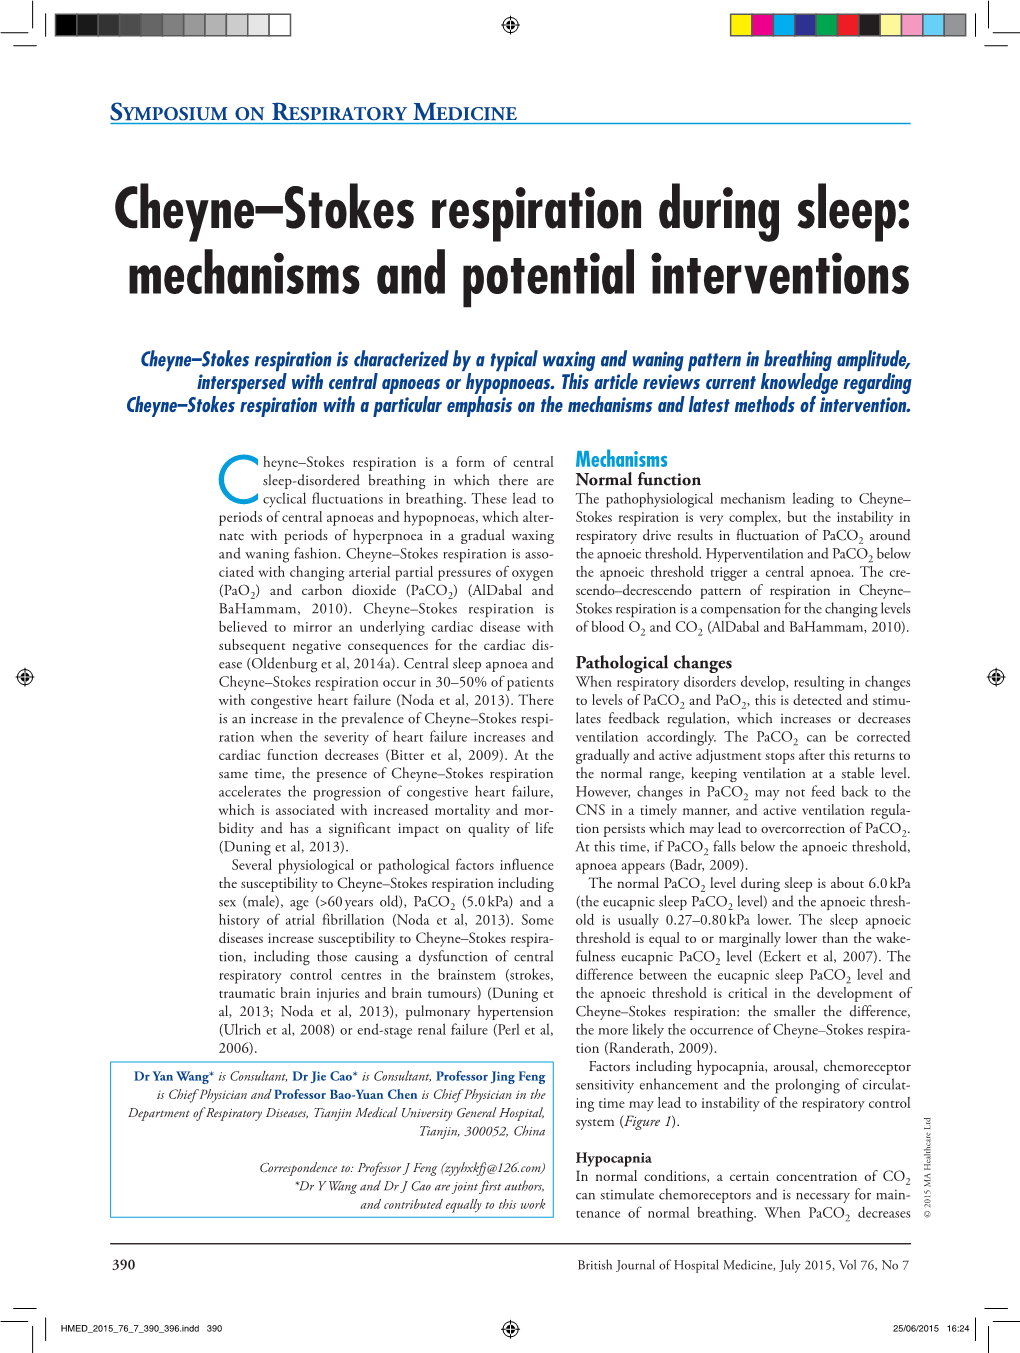 Cheyne–Stokes Respiration During Sleep: Mechanisms and Potential Interventions